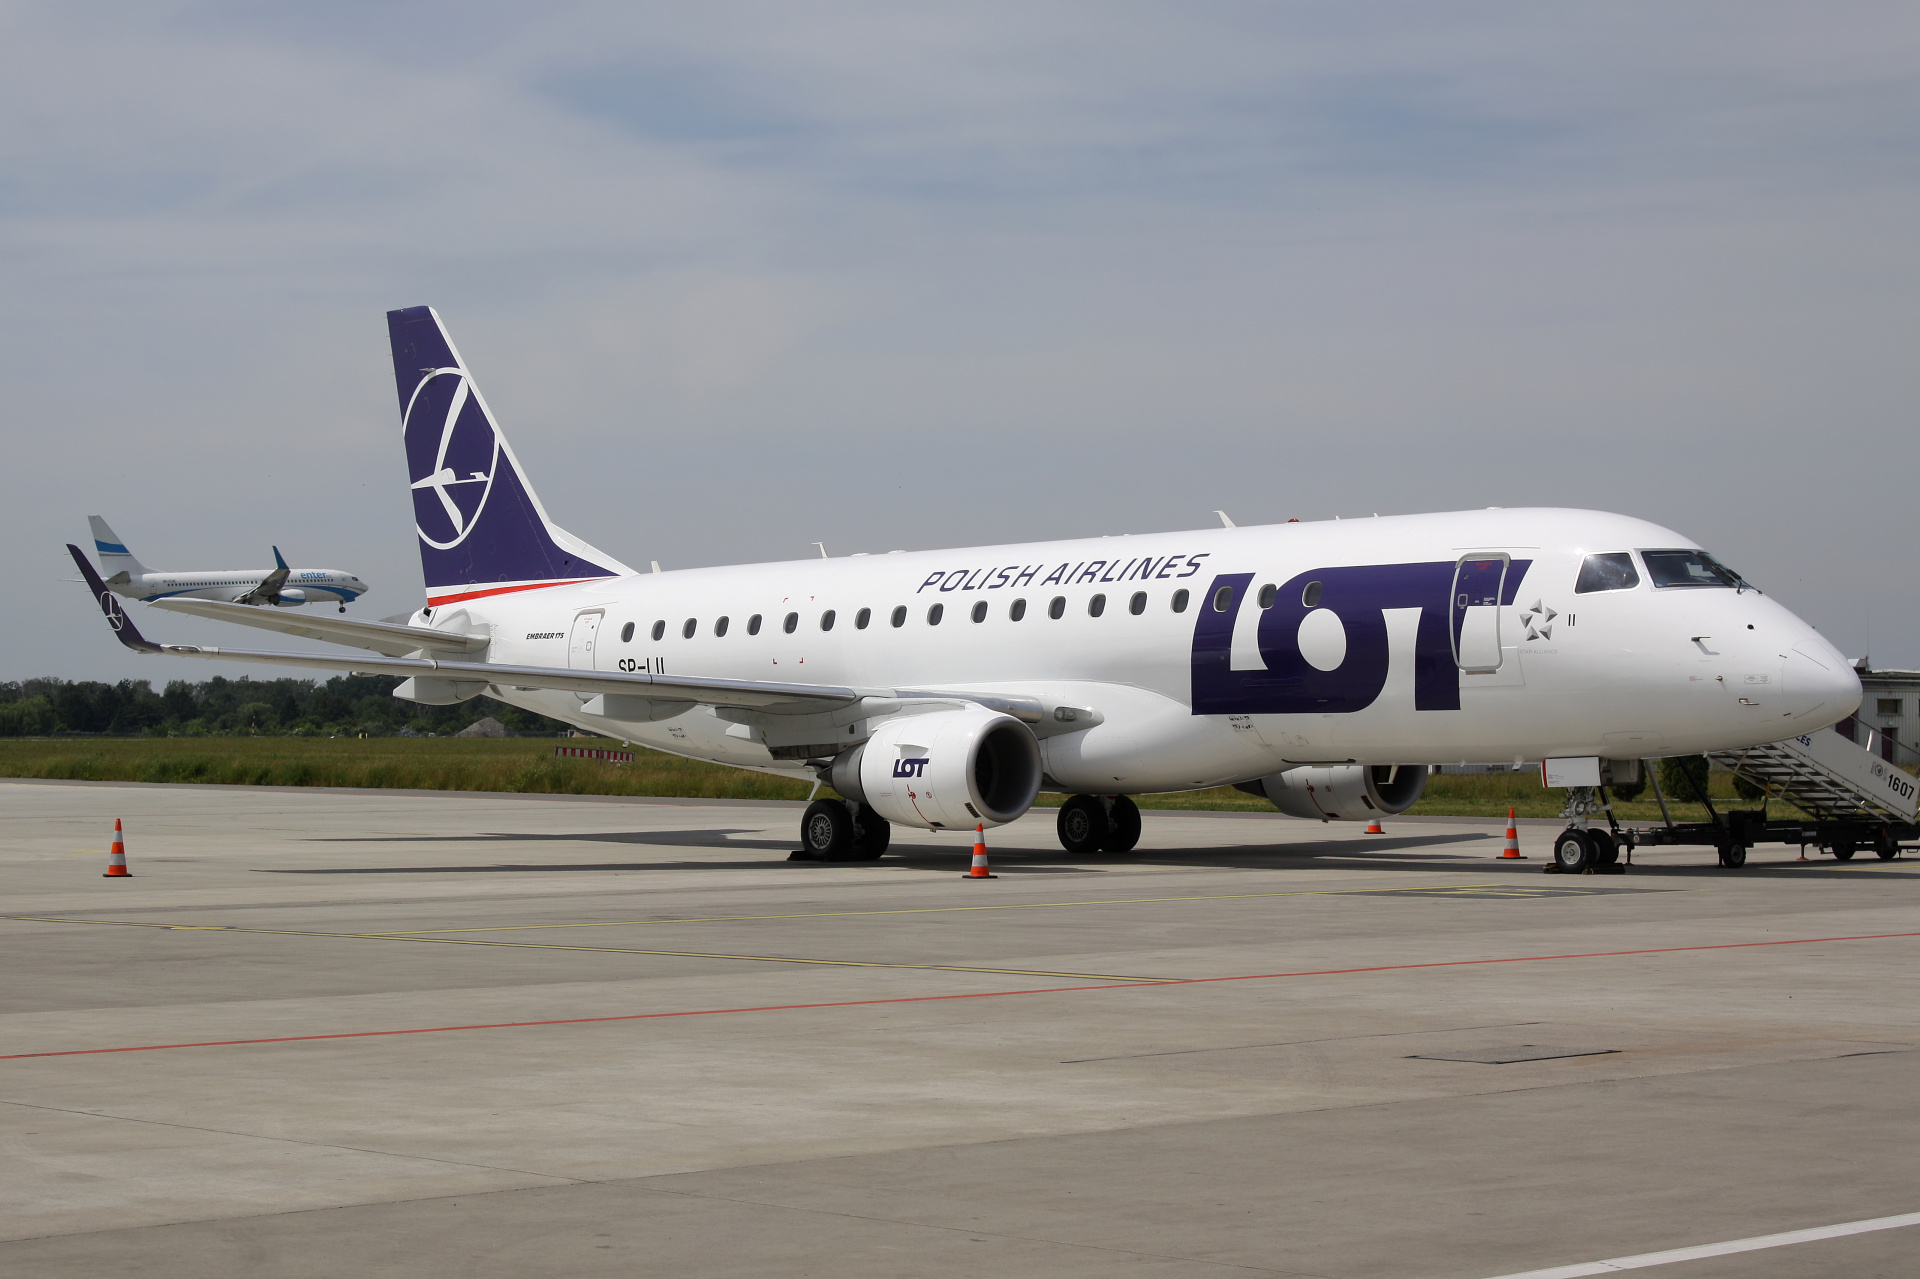 SP-LII (new livery) (Aircraft » EPWA Spotting » Embraer E175 » LOT Polish Airlines)